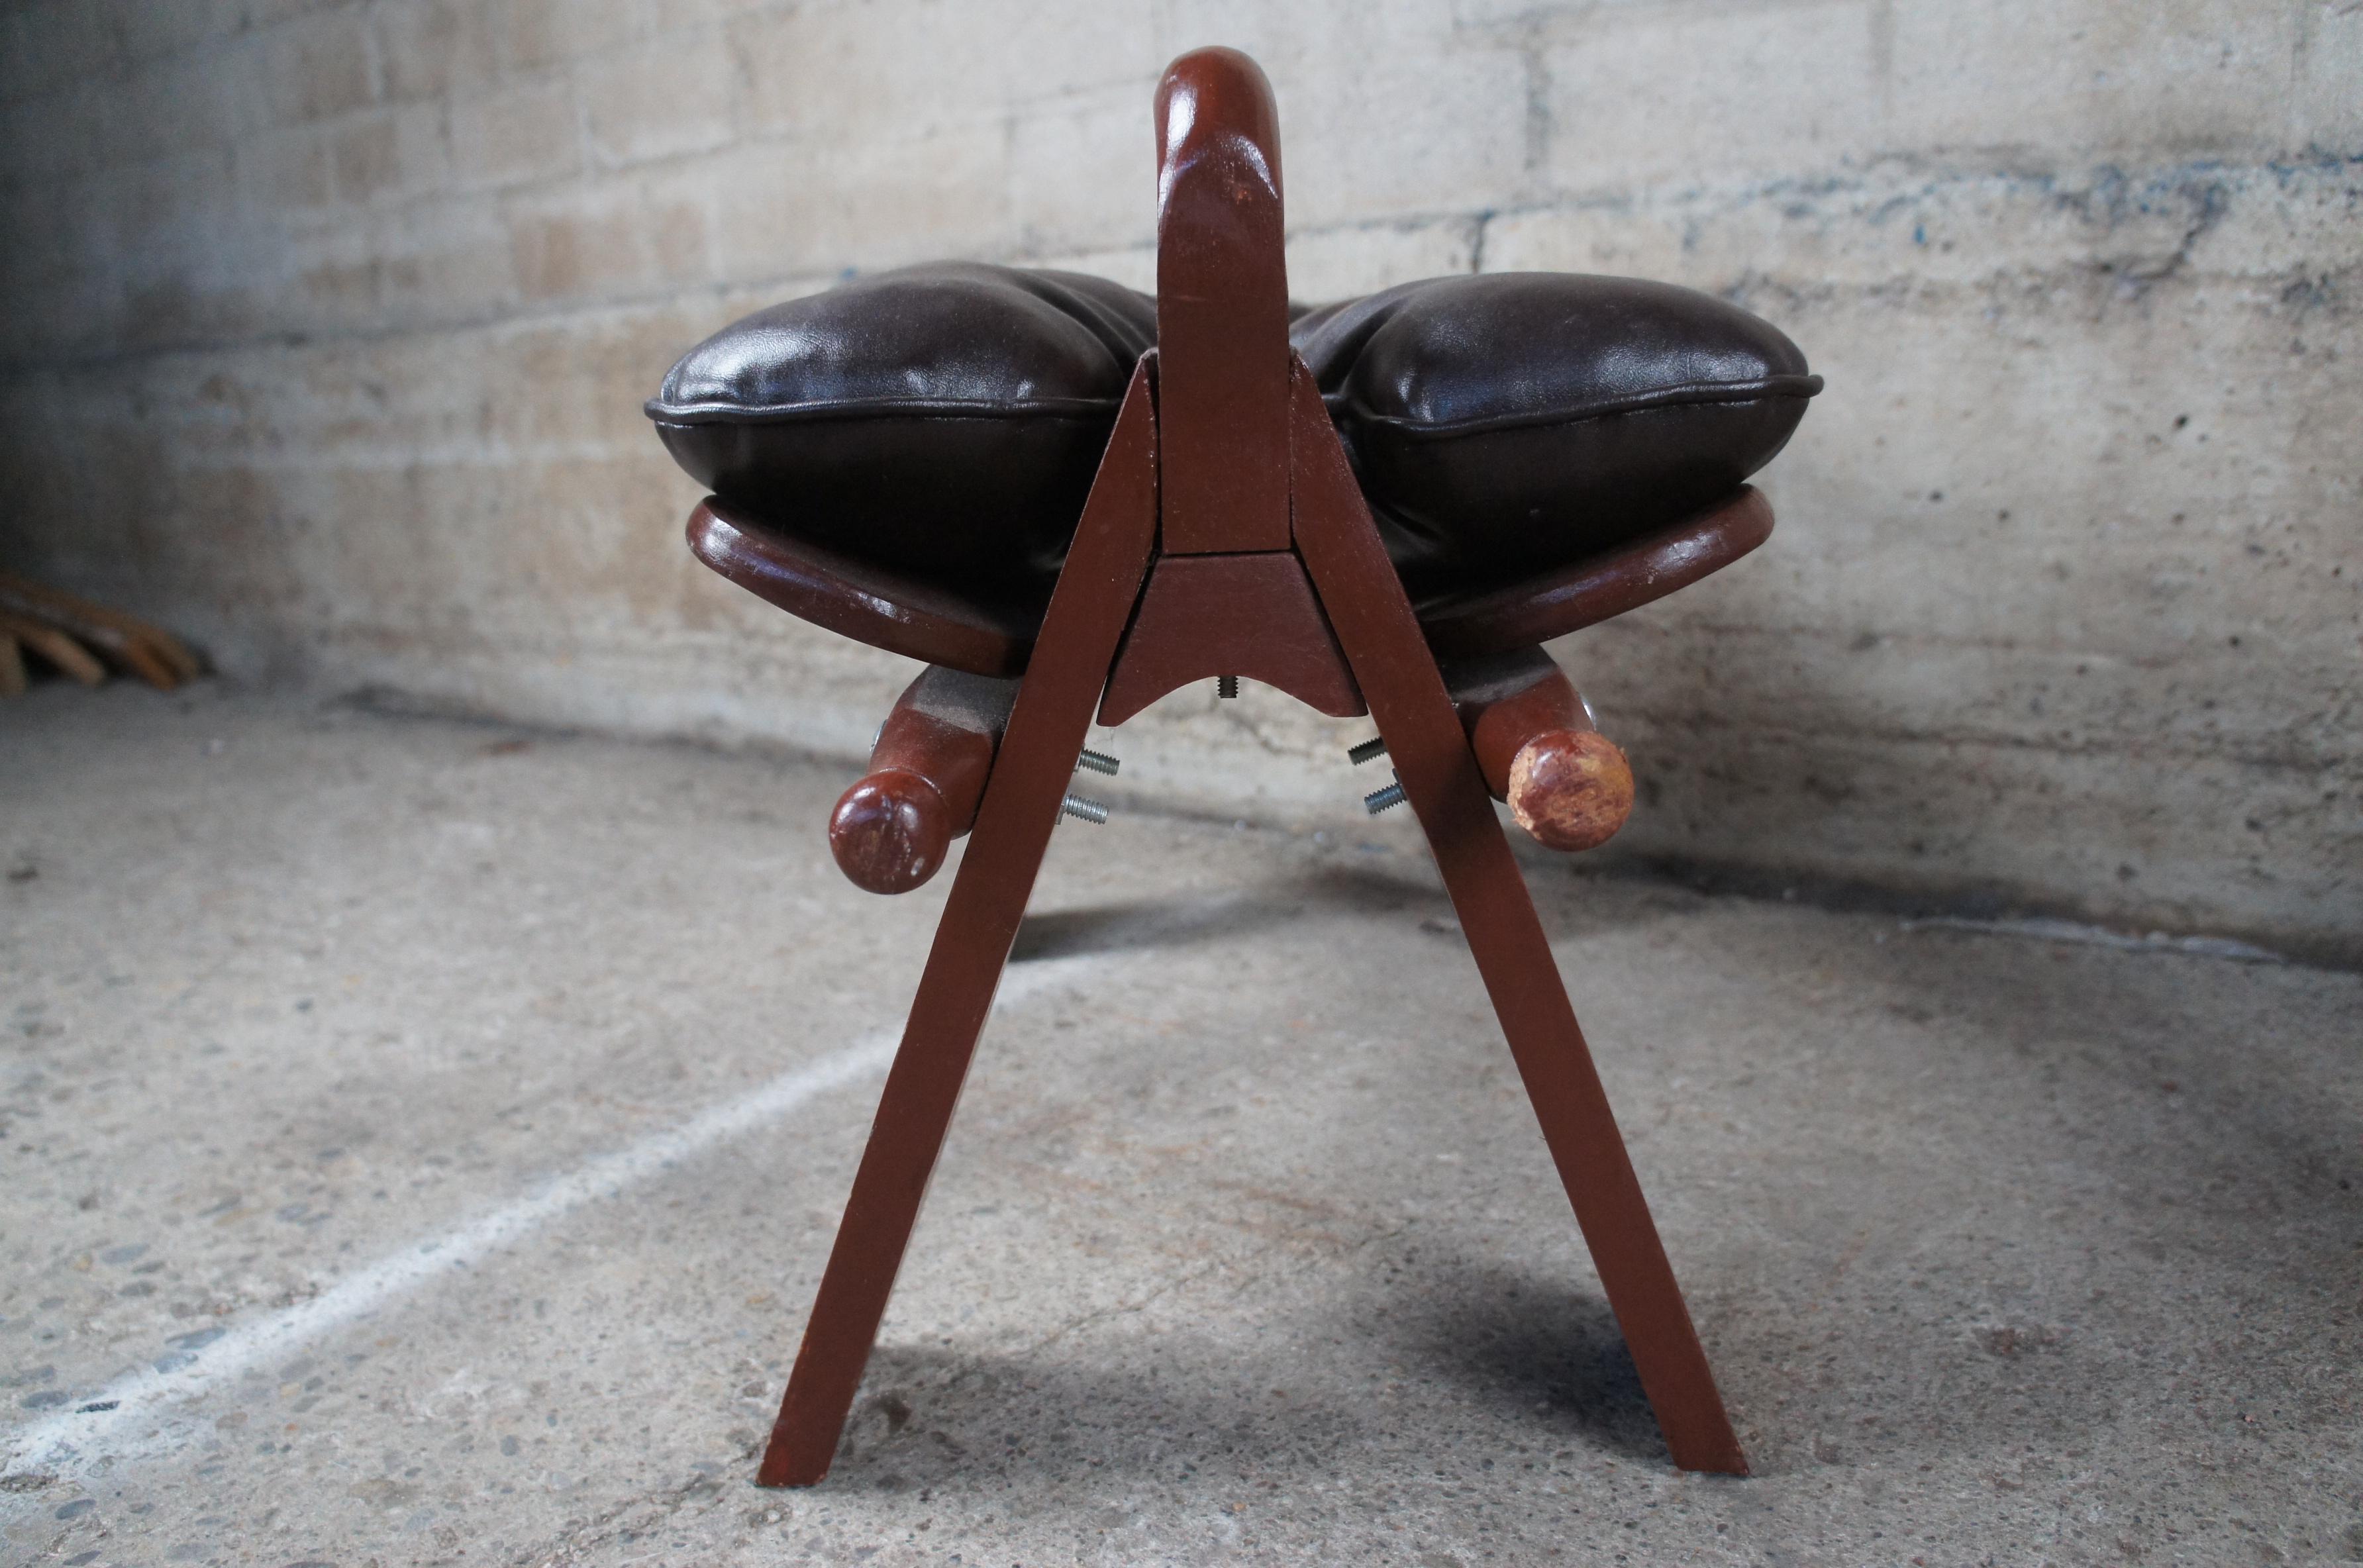 Mid-20th Century 2 Moroccan Leather Saddle Camel Stools Foot Rest Ottoman Pouf Bench Seat 29